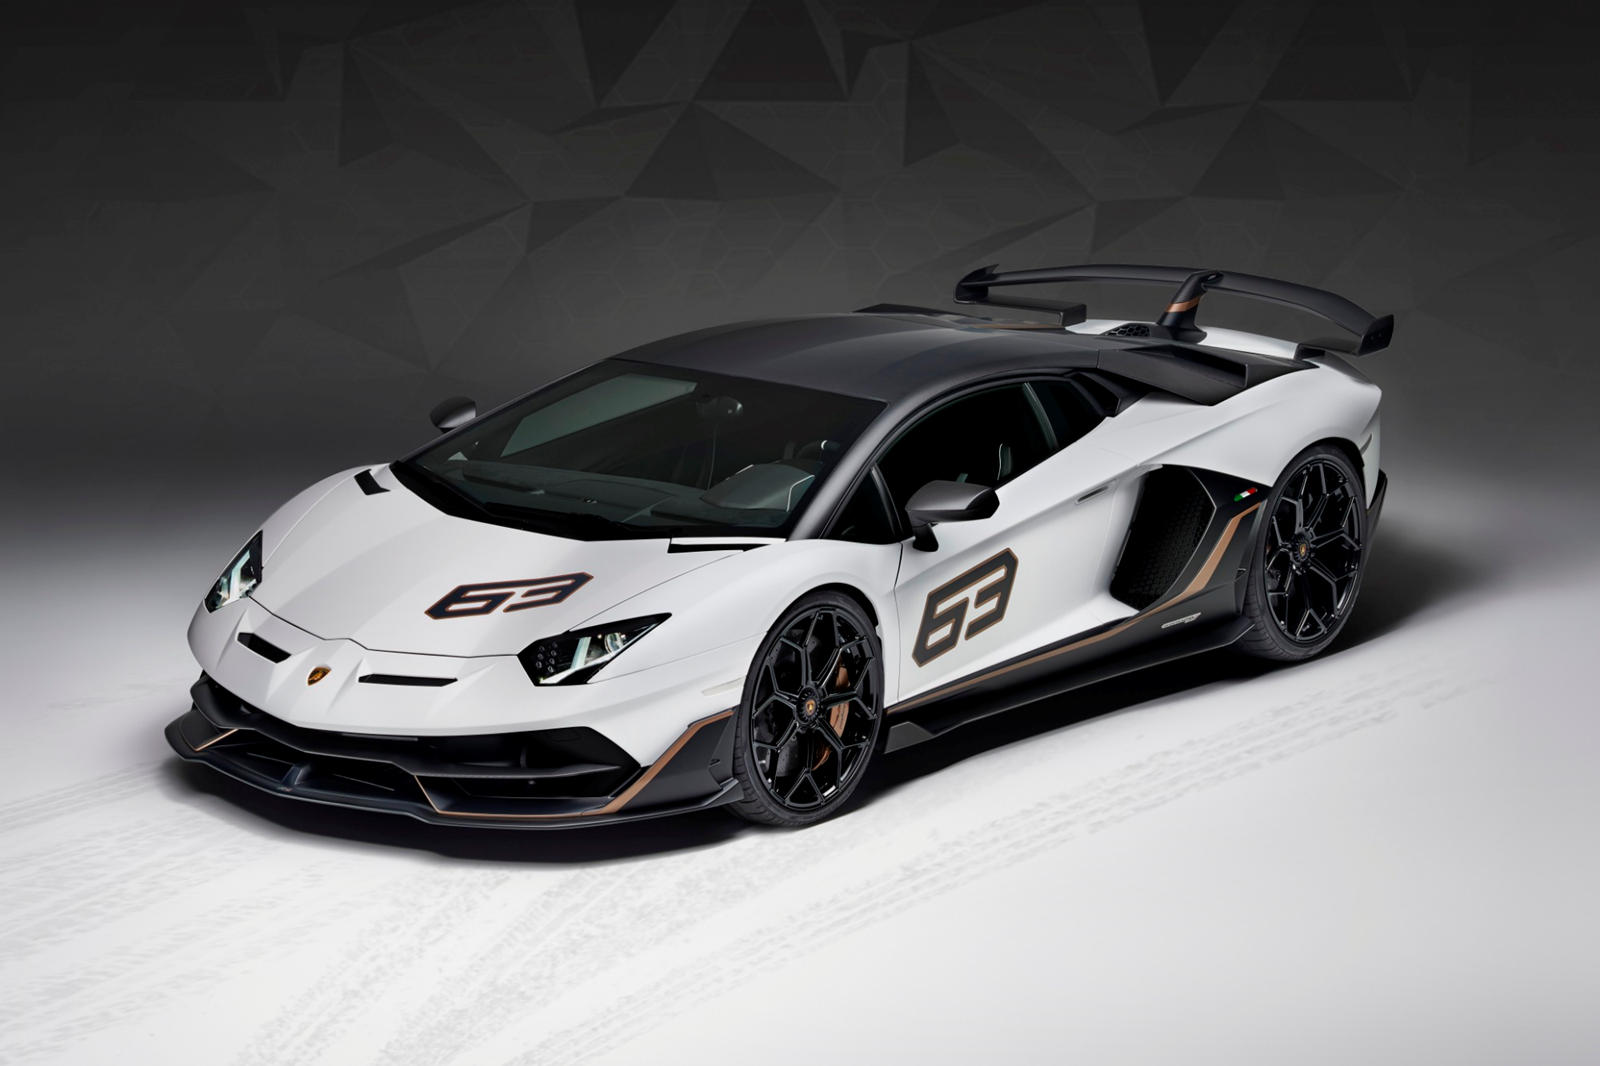 Its Finally Here Record Holding 770 Hp Lamborghini Aventador Svj Arrives With Svj 63 Special 